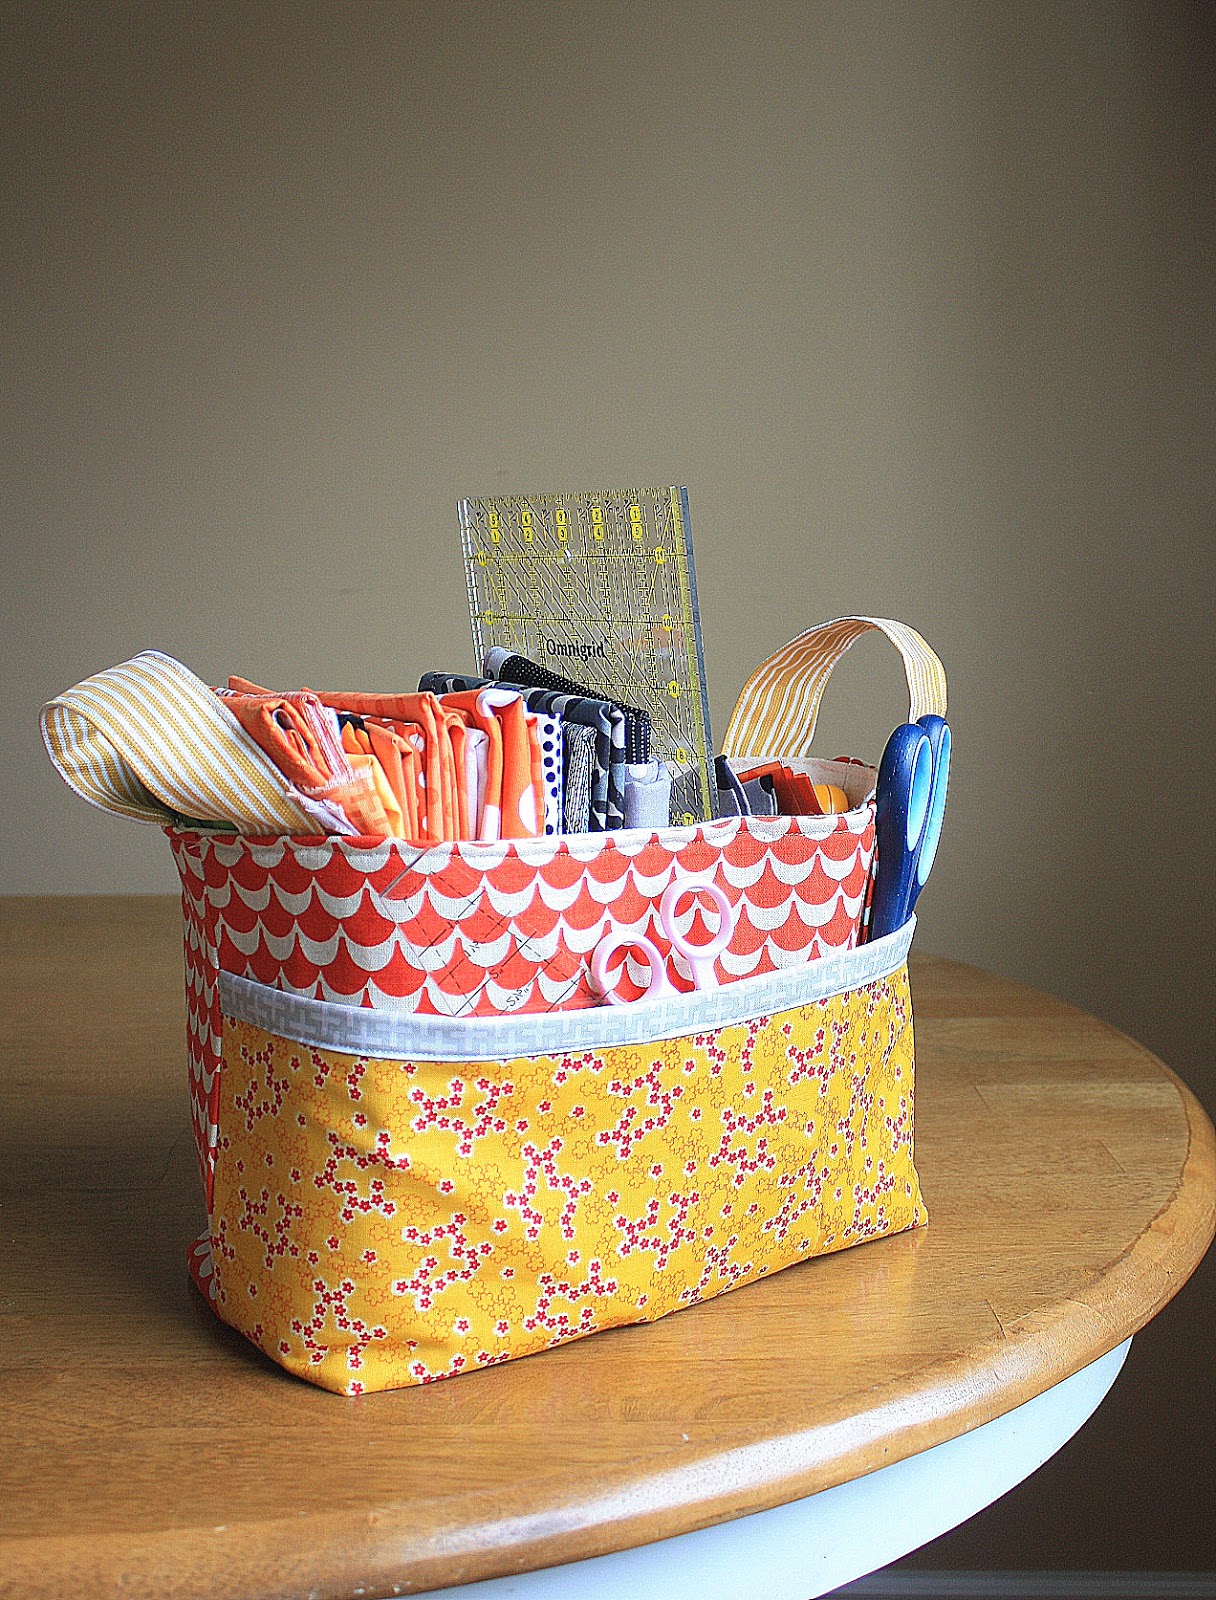 Handmade Divided Basket and Purse Palooza - Diary of a Quilter - a quilt  blog